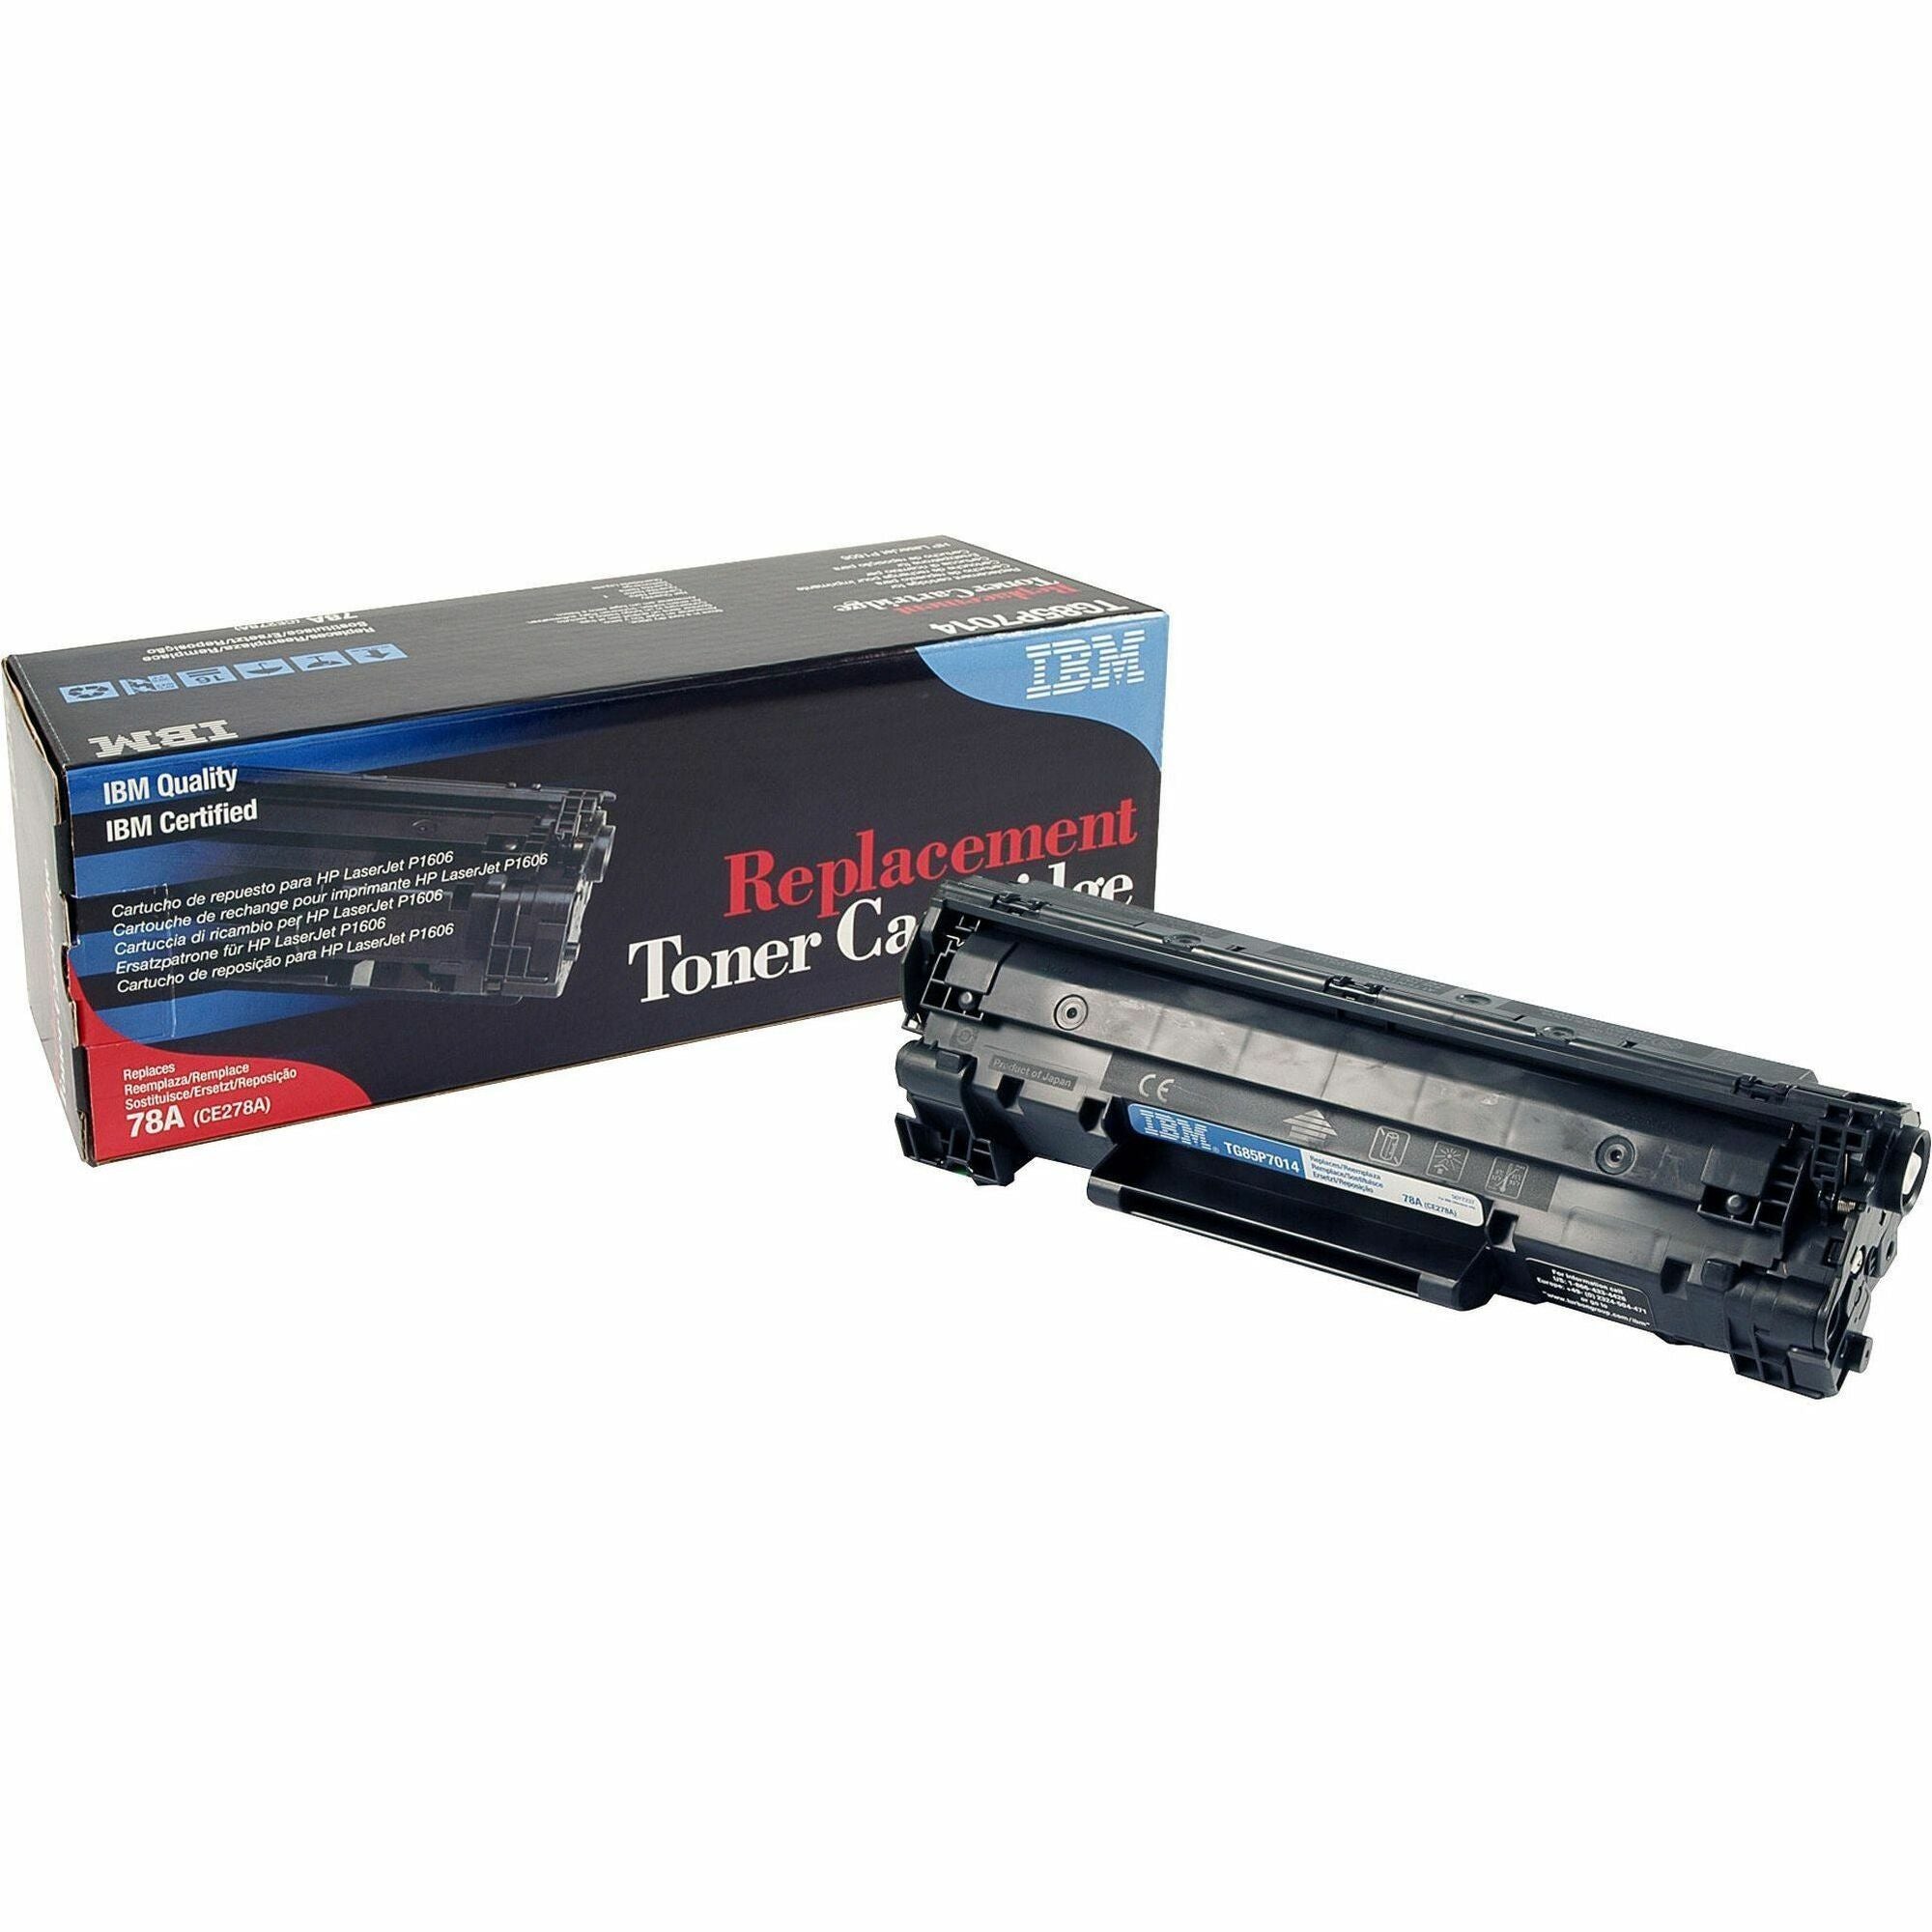 IBM Remanufactured Laser Toner Cartridge - Alternative for HP 78A (CE278A) - Black - 1 Each - 2100 Pages - 